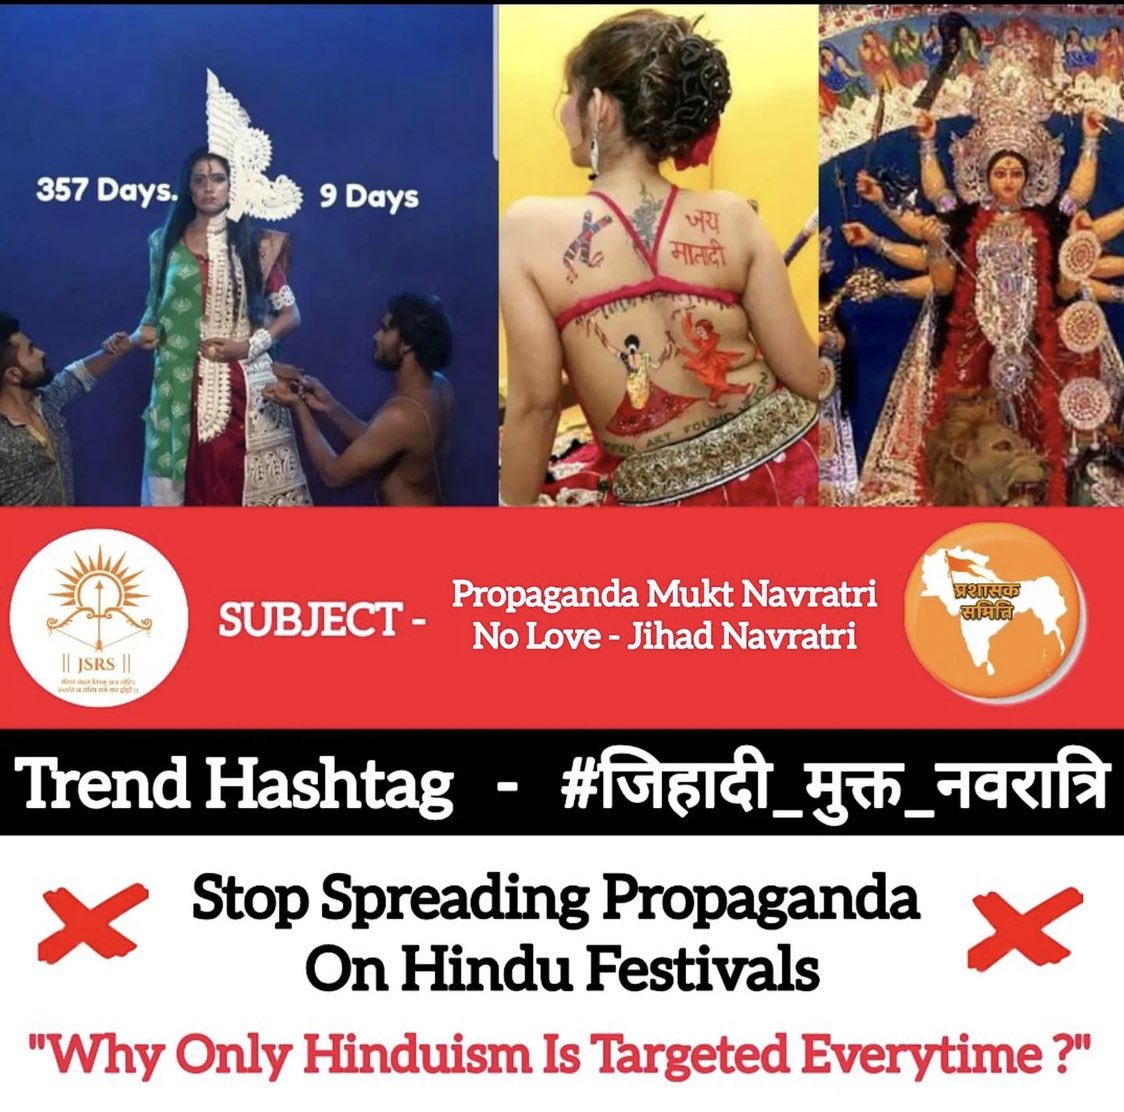 Why are only Hindu festivals and Hindus targeted everywhere and every time? 
Portray a women getting raped by 100 men in public & tag it as Taharrush Gamiya and then see what these peaceful community members will do to you. #StopHinduGenocide #जिहादी_मुक्त_नवरात्रि #freenavratri